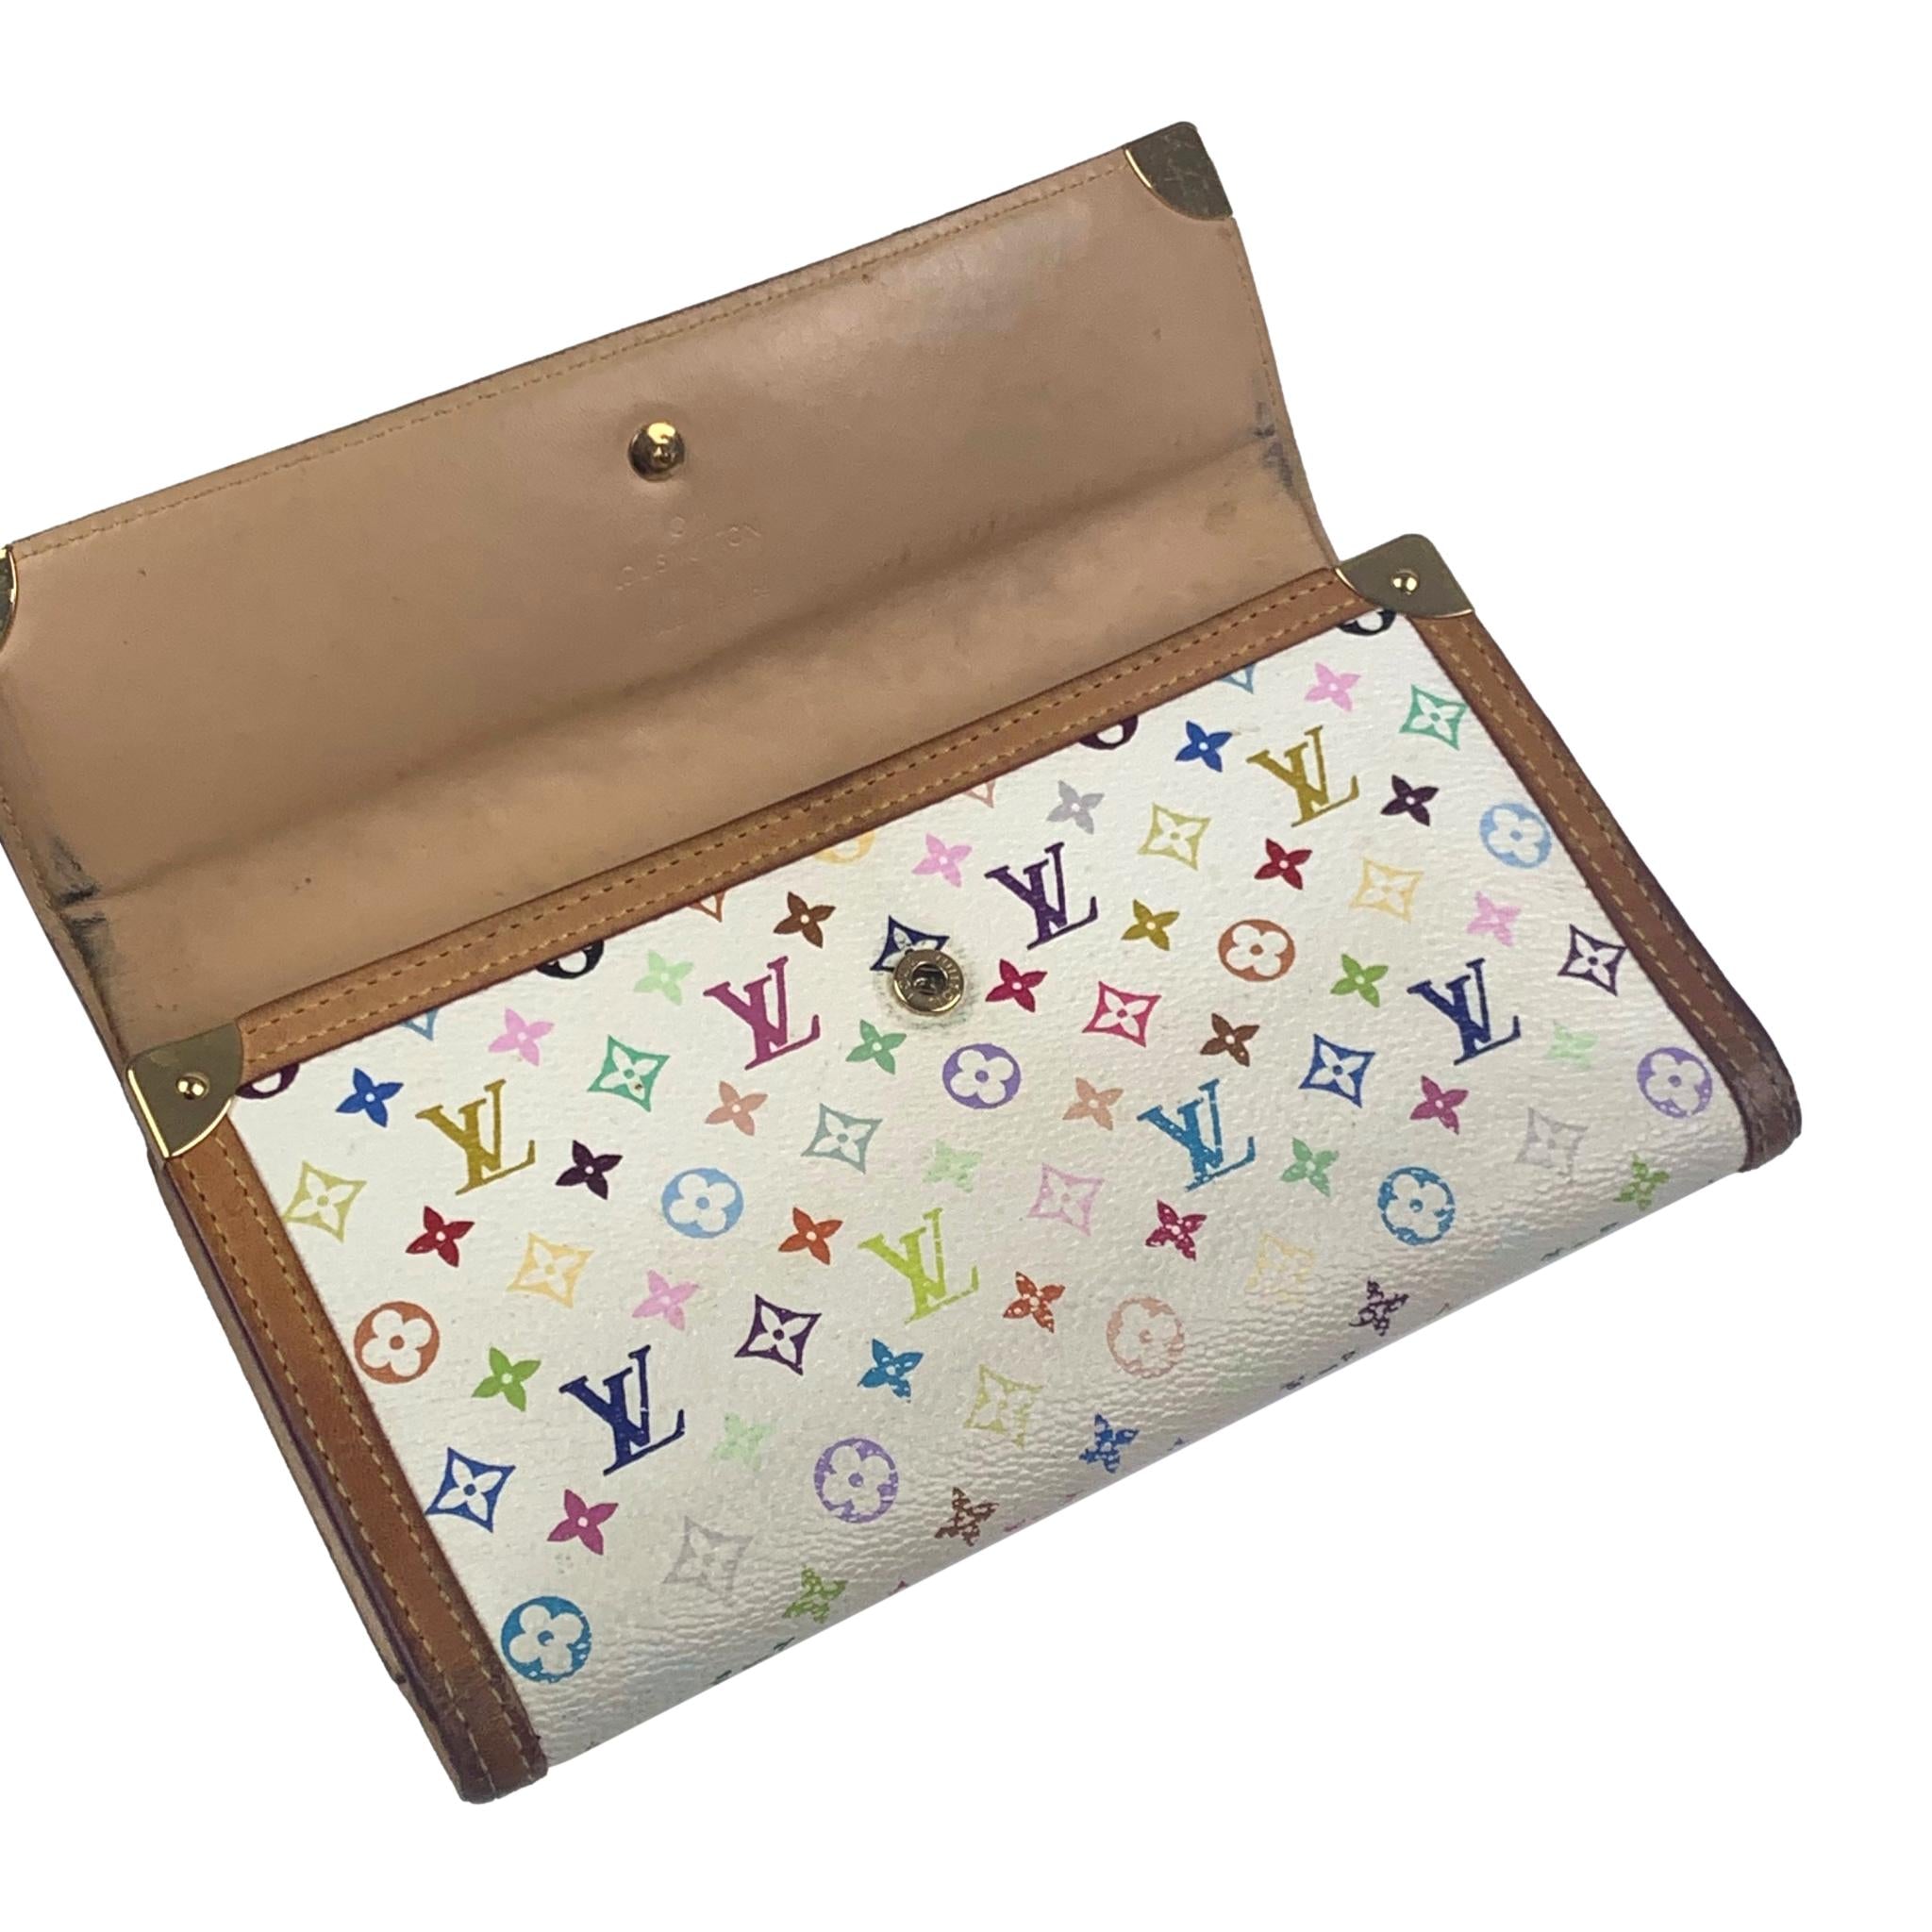 w2c louis vuitton x takashi murakami items with this pattern?only found a  similar wallet so far. : r/DHgate